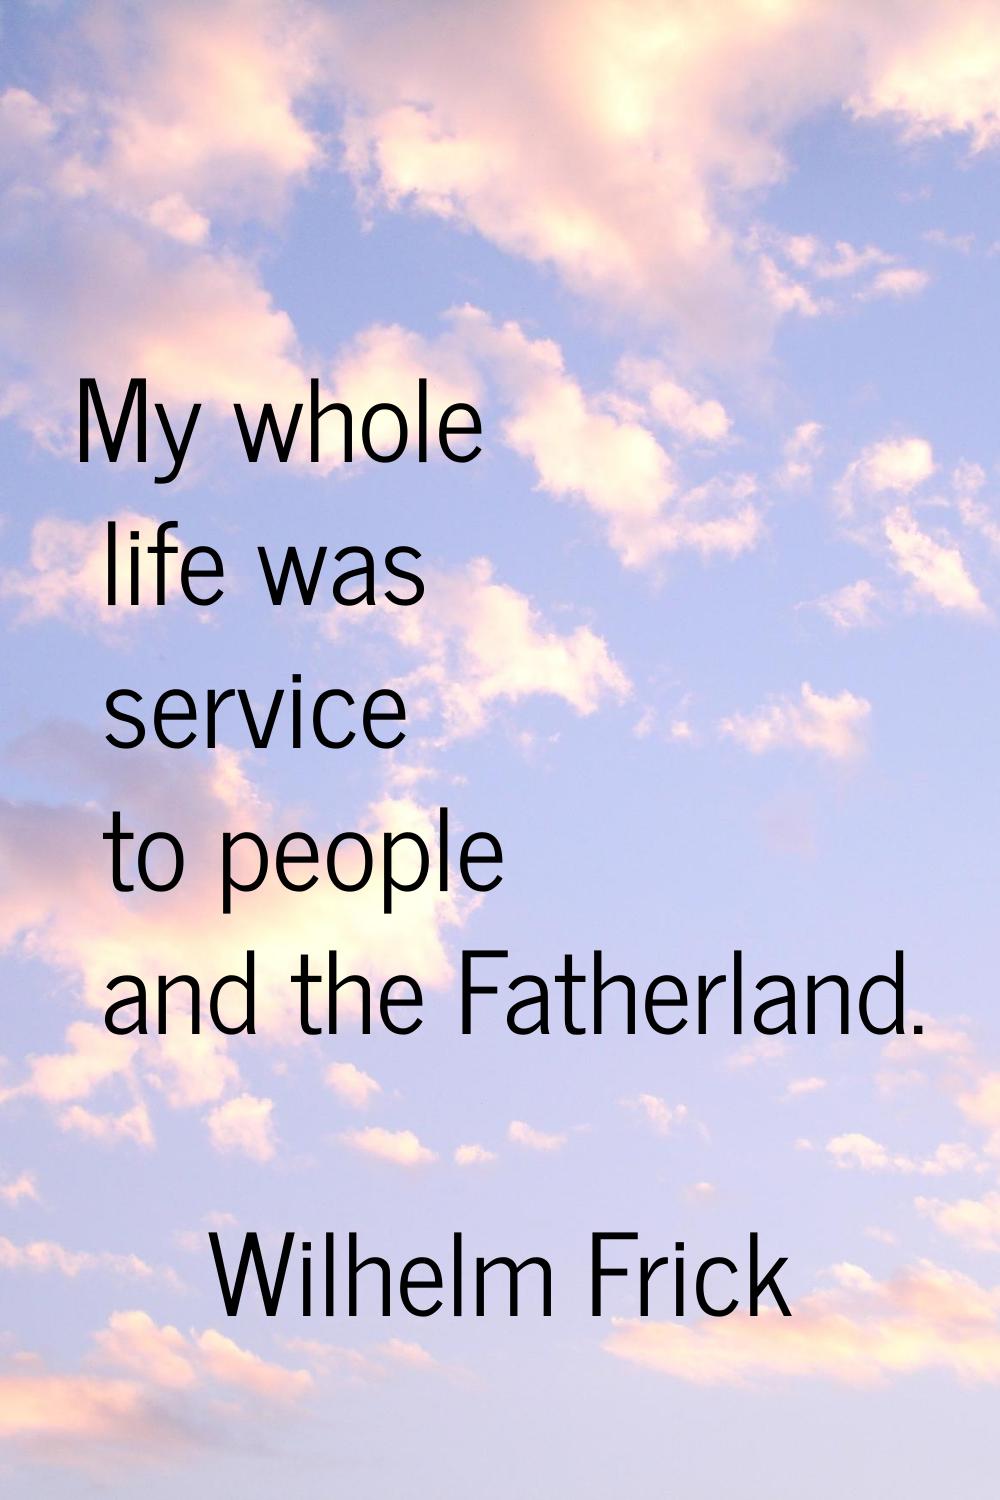 My whole life was service to people and the Fatherland.